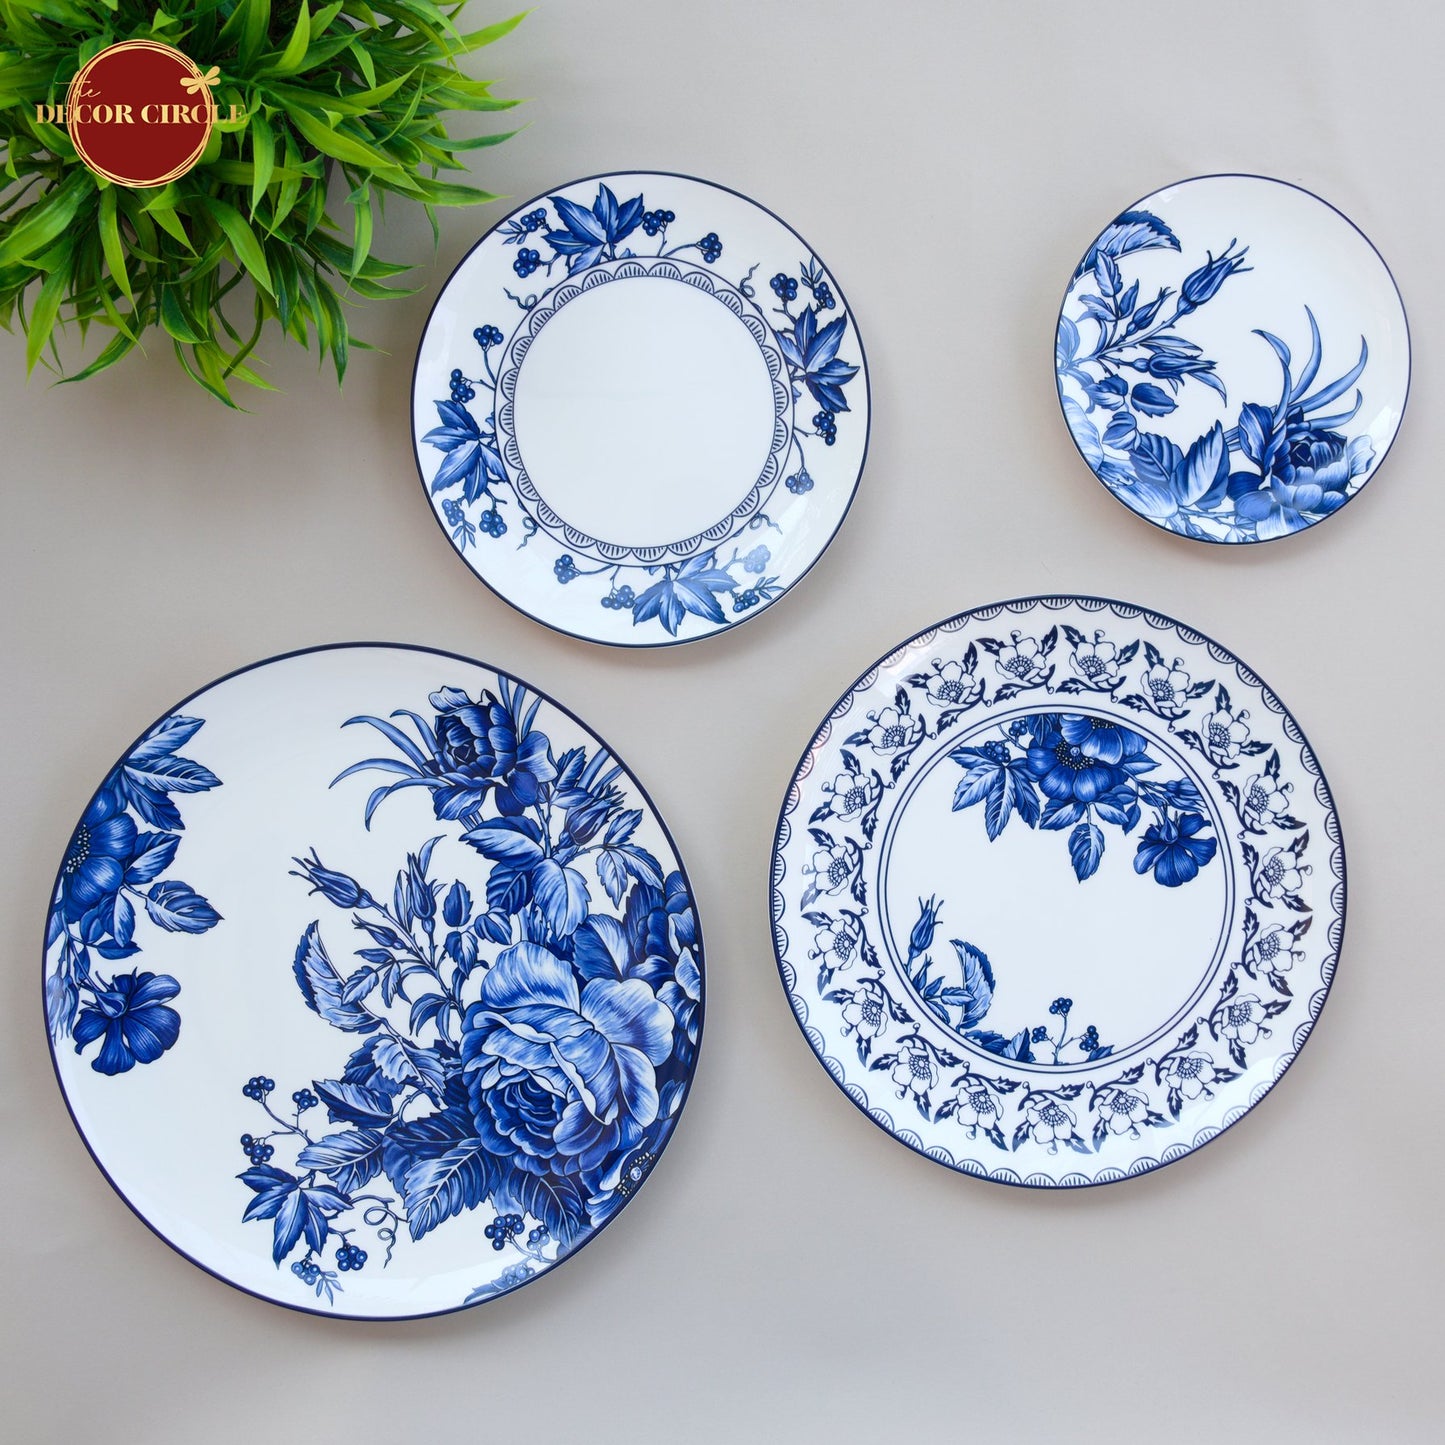 Kheima Blue Paradise Charger Plate(12 inches)